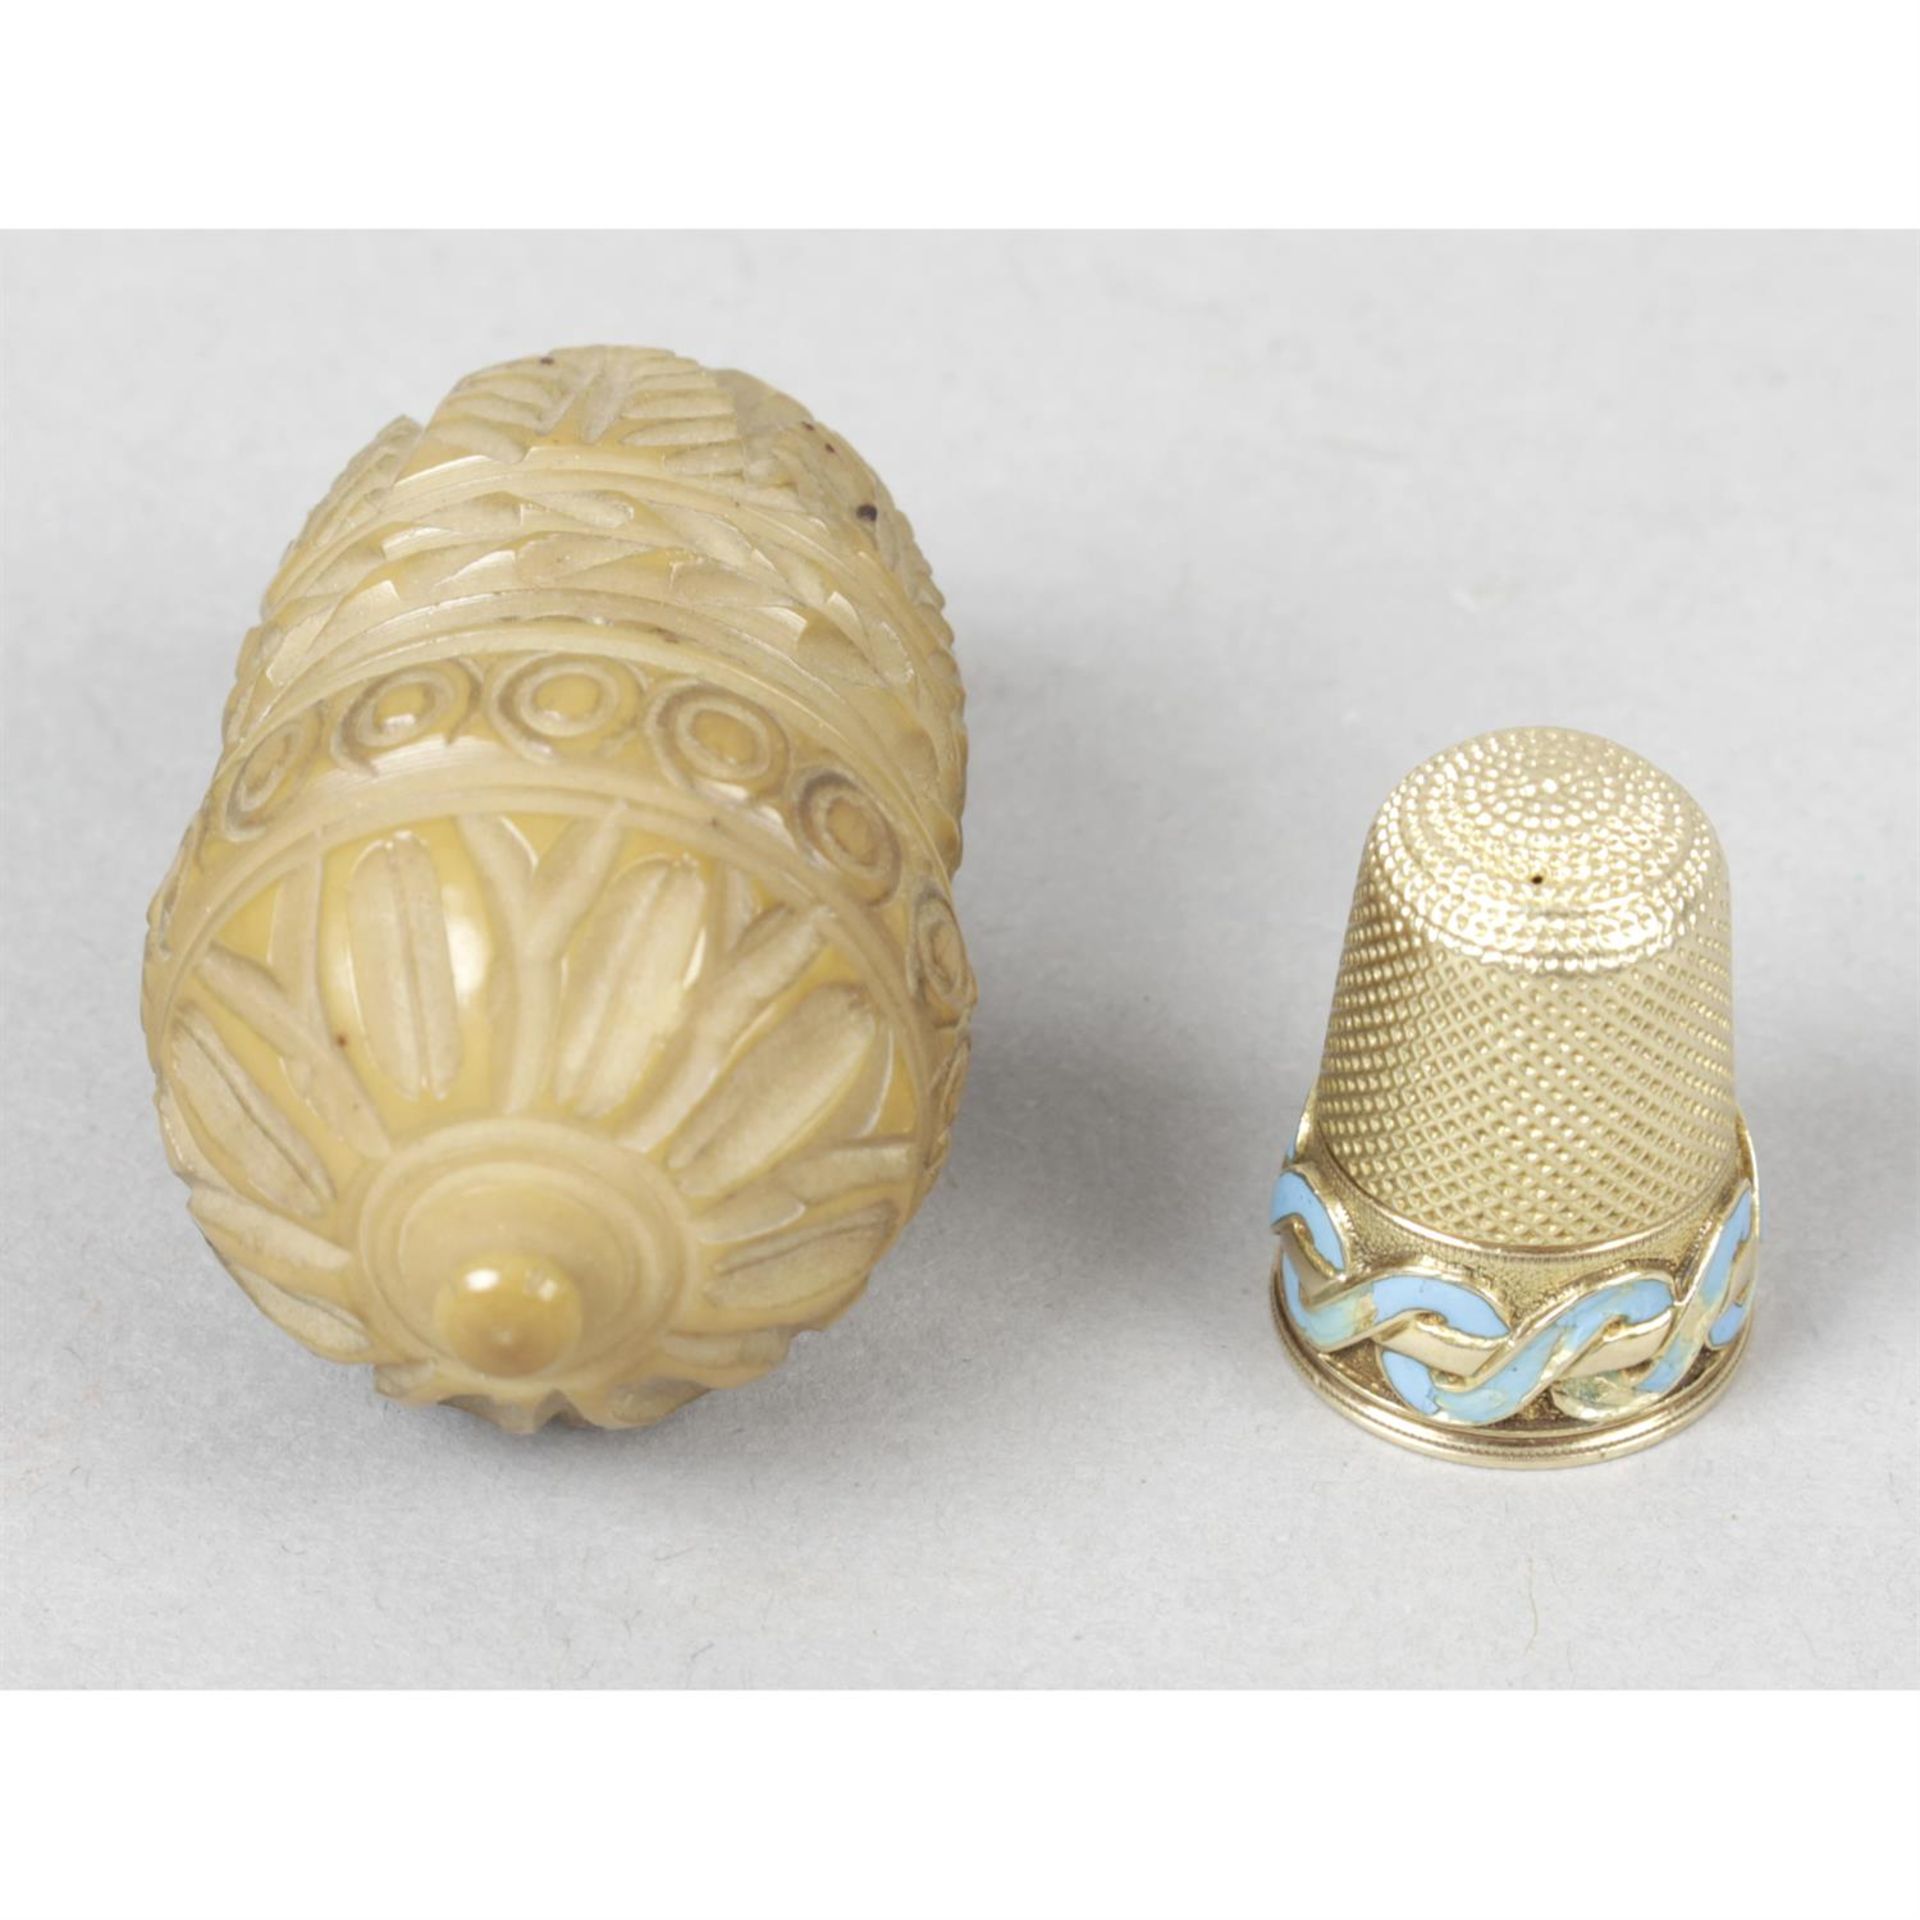 A late 19th century carved Coquilla nut and gold thimble.